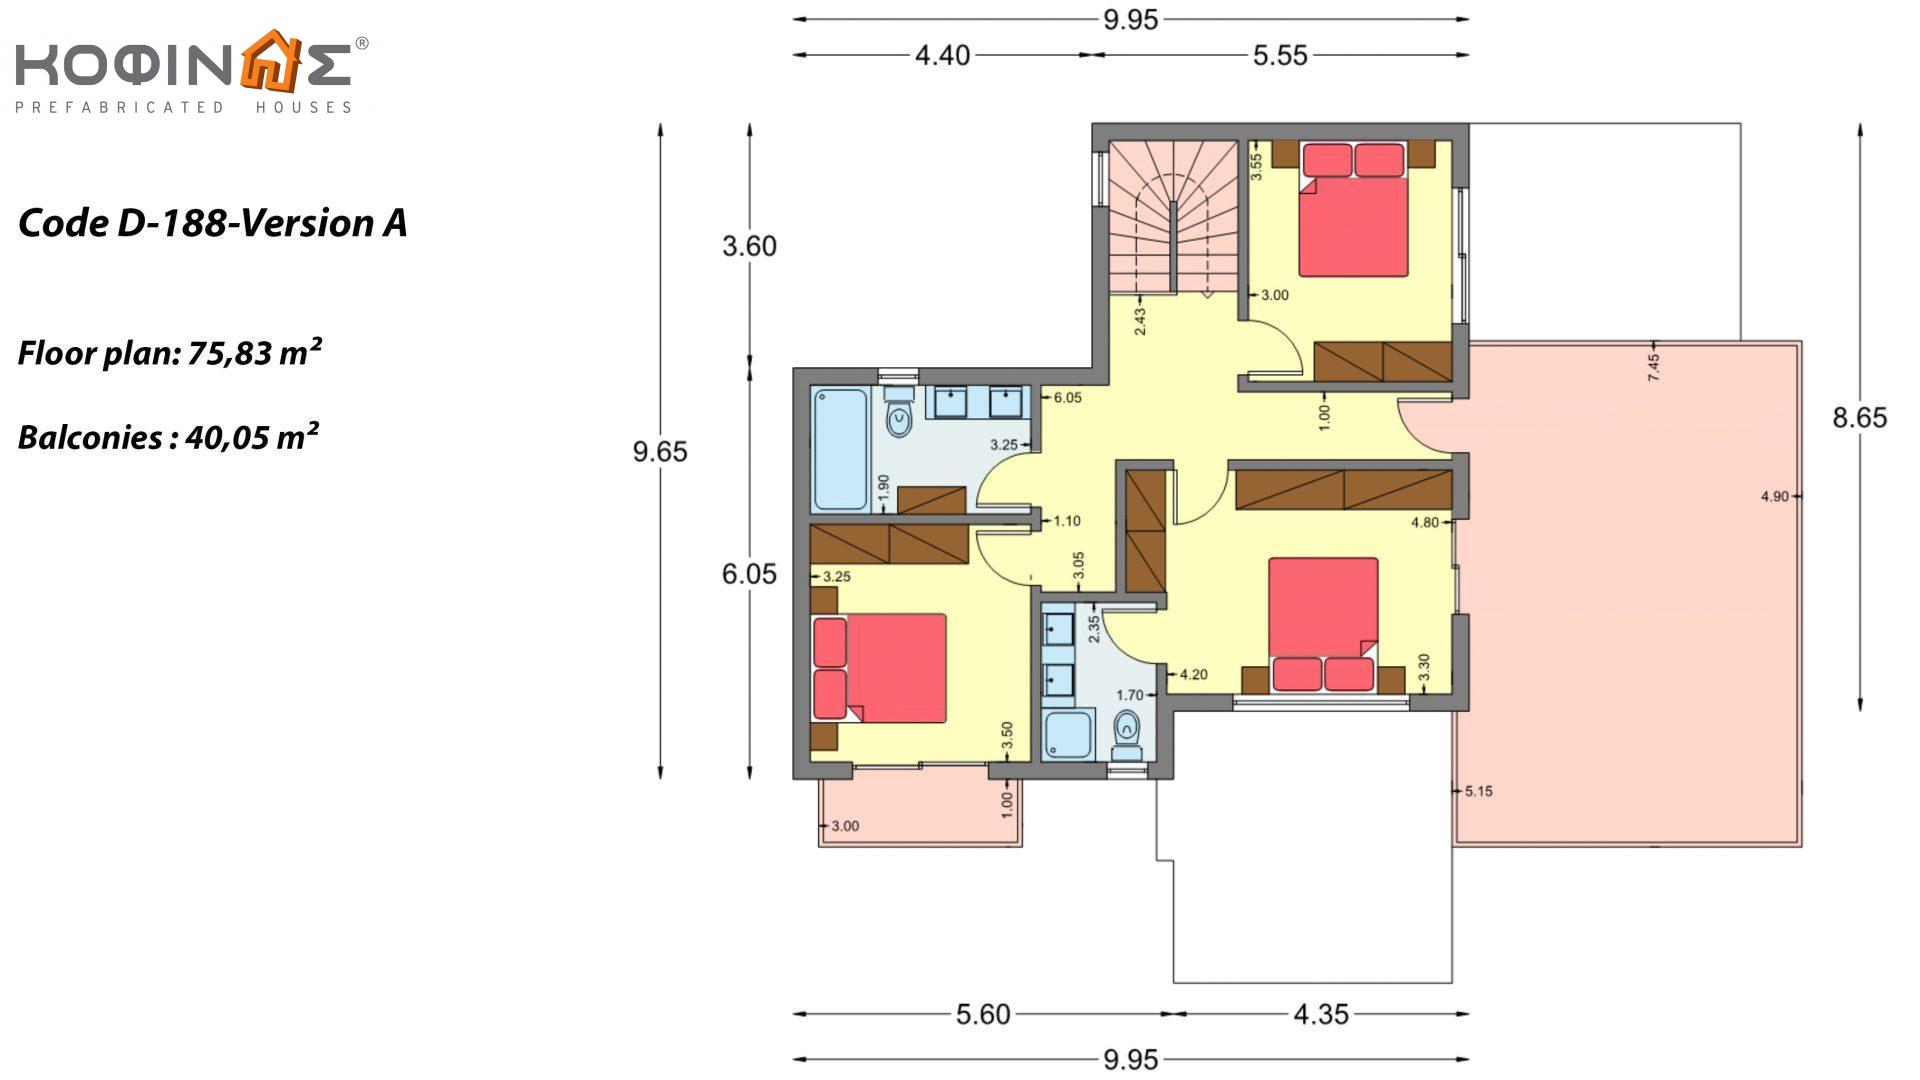 2-story house D-188, total surface of 188,66 m² ,roofed areas 38.20 m²,balconies 40.05 m²